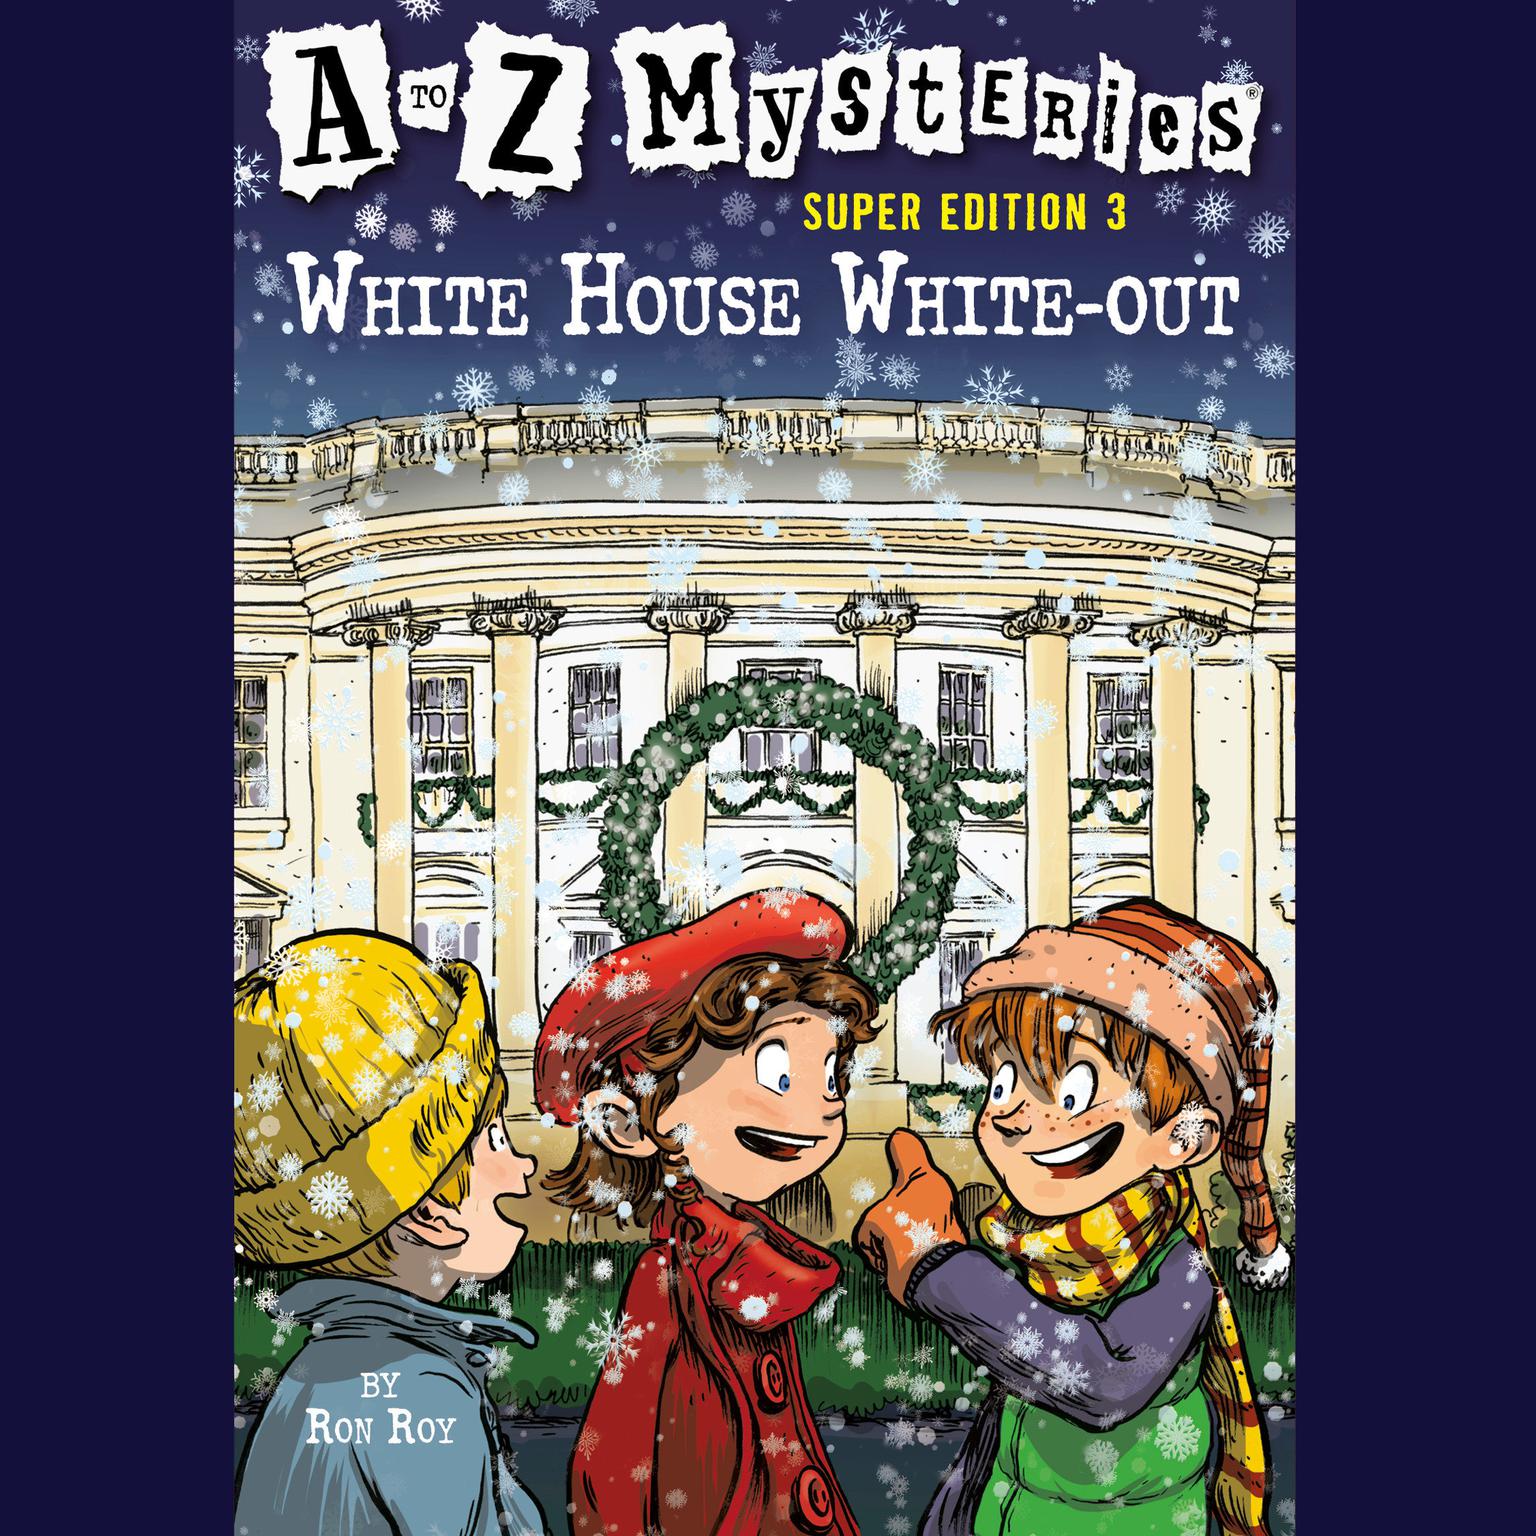 A to Z Mysteries Super Edition #3: White House White-Out Audiobook, by Ron Roy